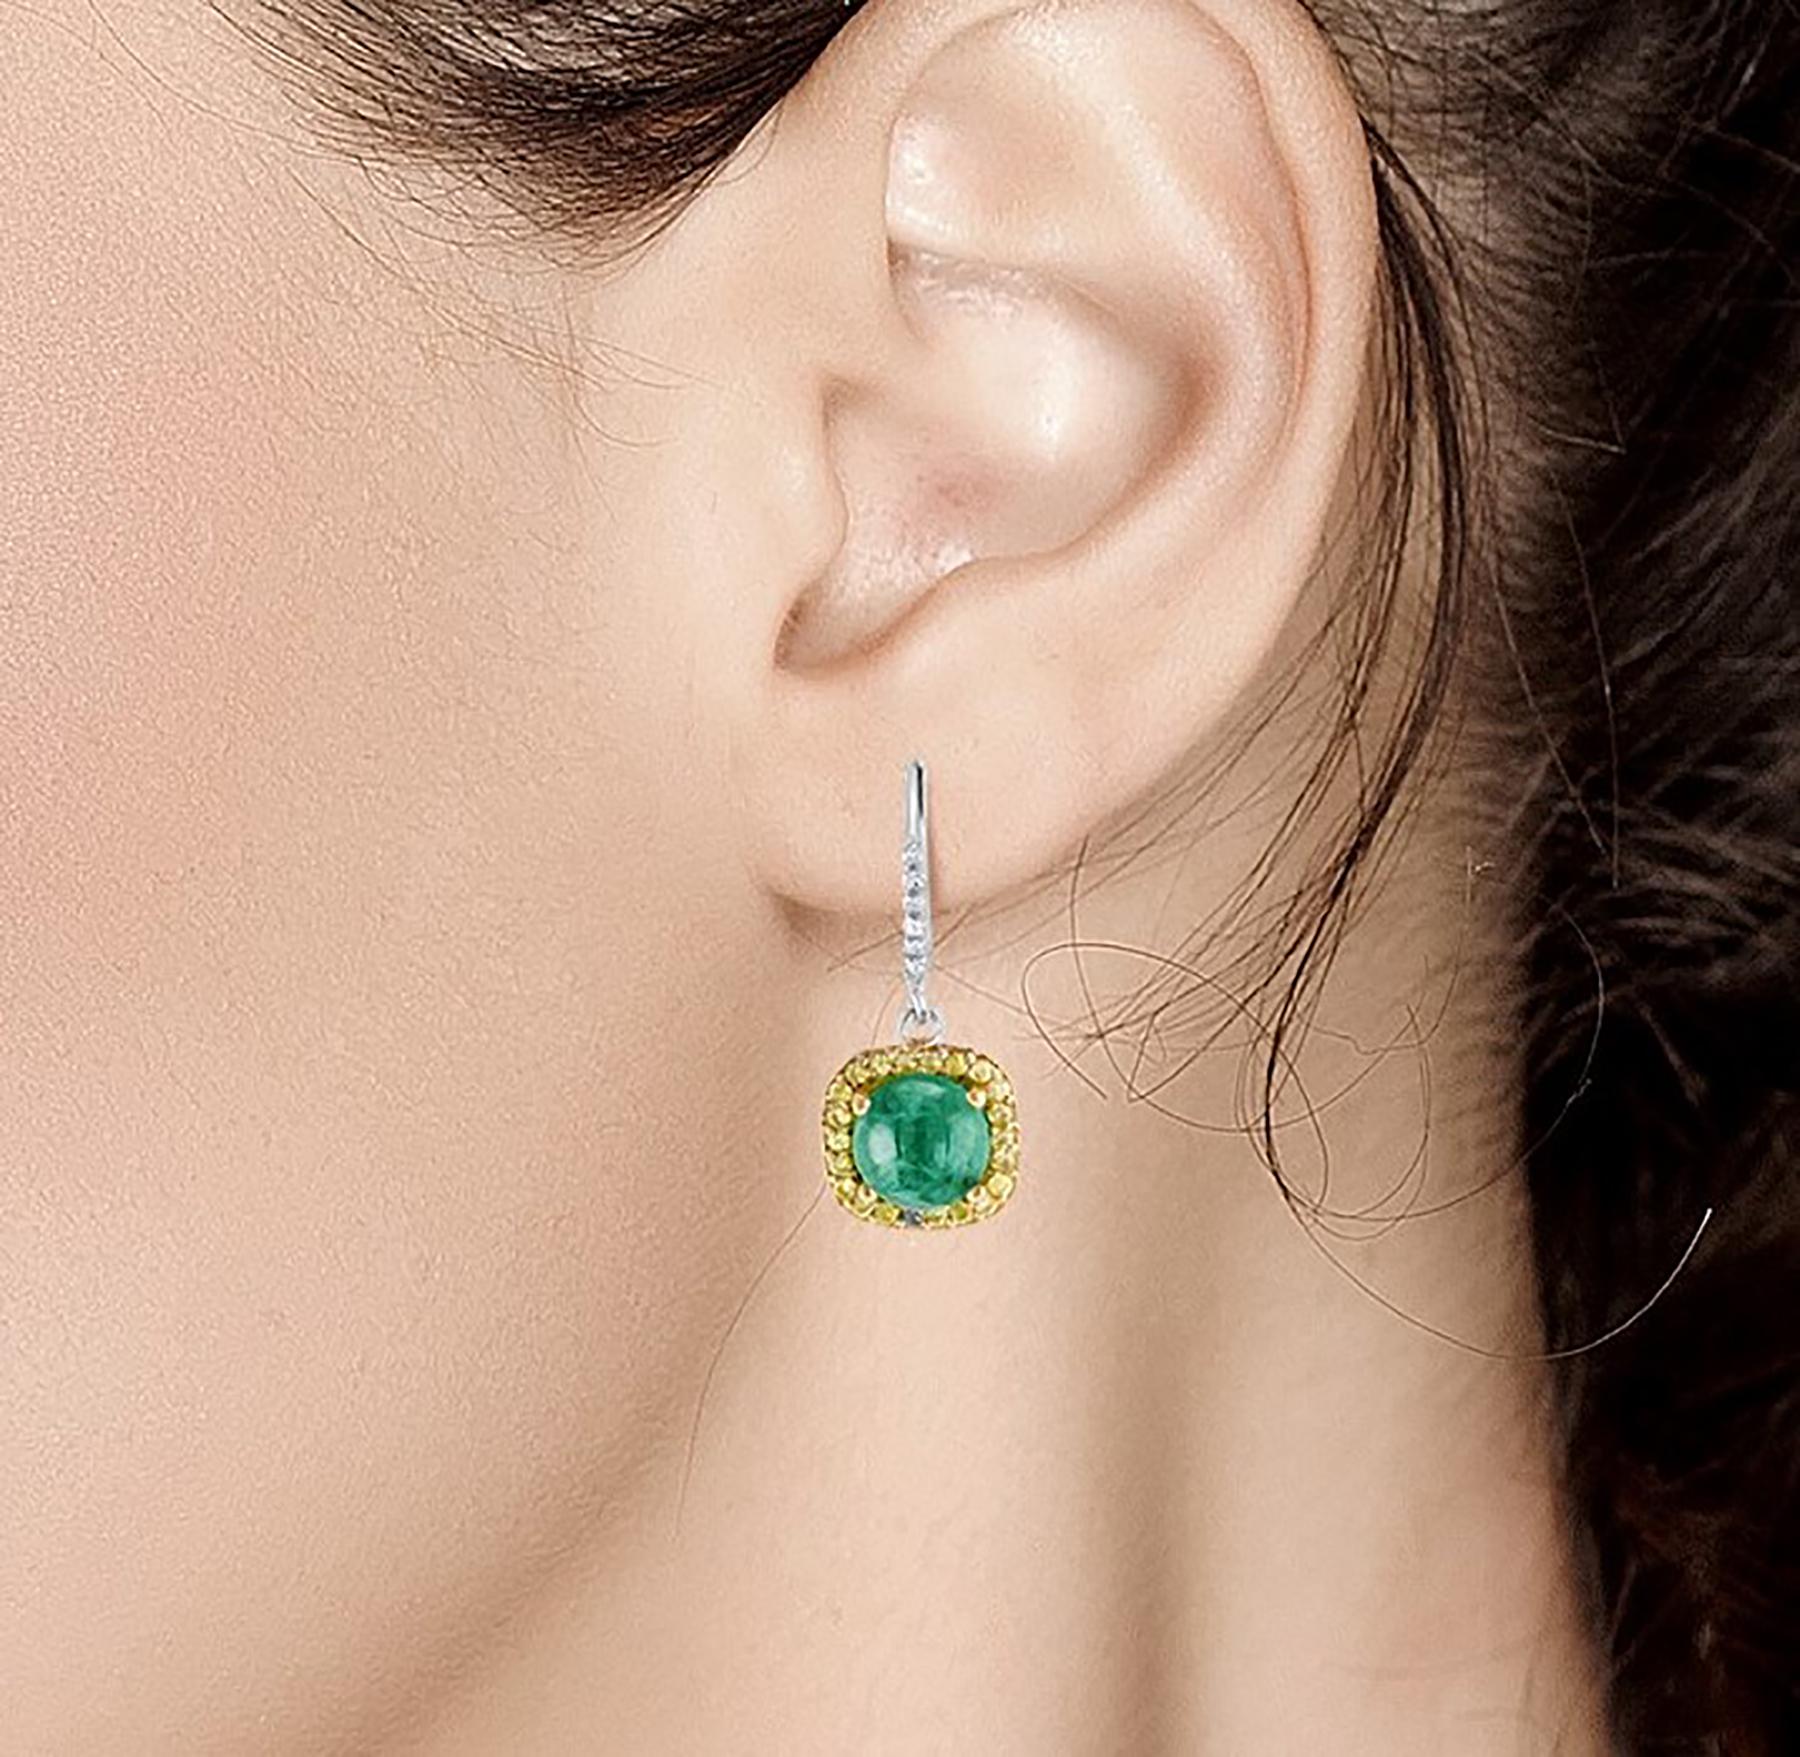 Round Cut Round Cabochon Emerald and Diamond Drop Hoop Earrings